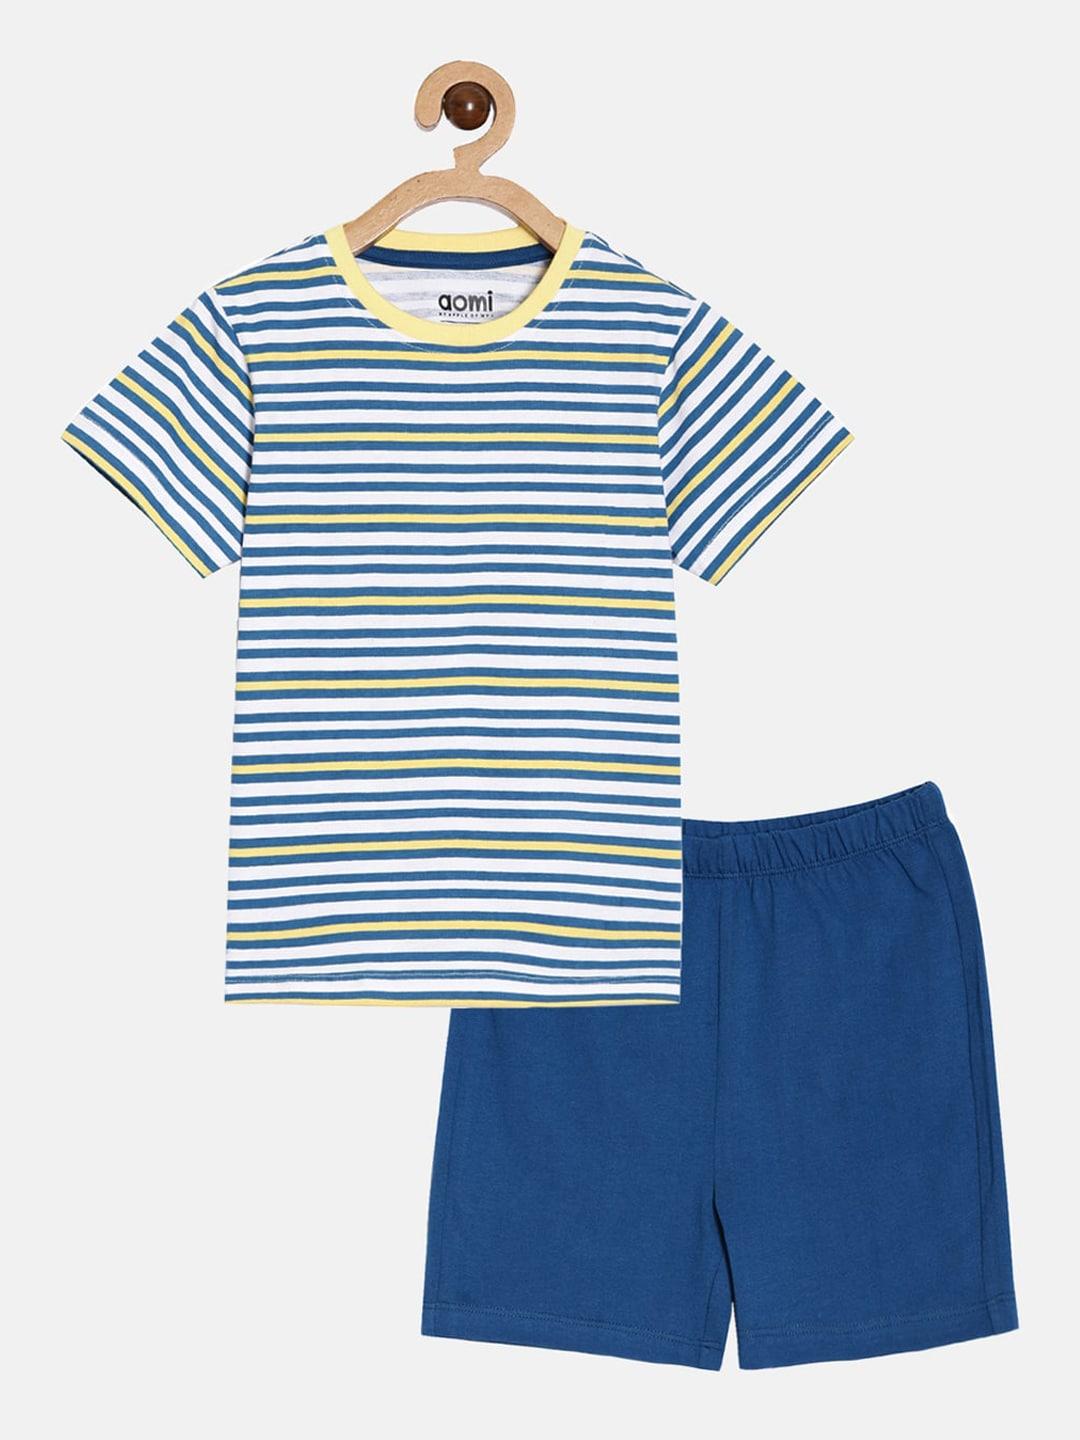 Aomi Boys Blue & White Printed T-shirt with Shorts